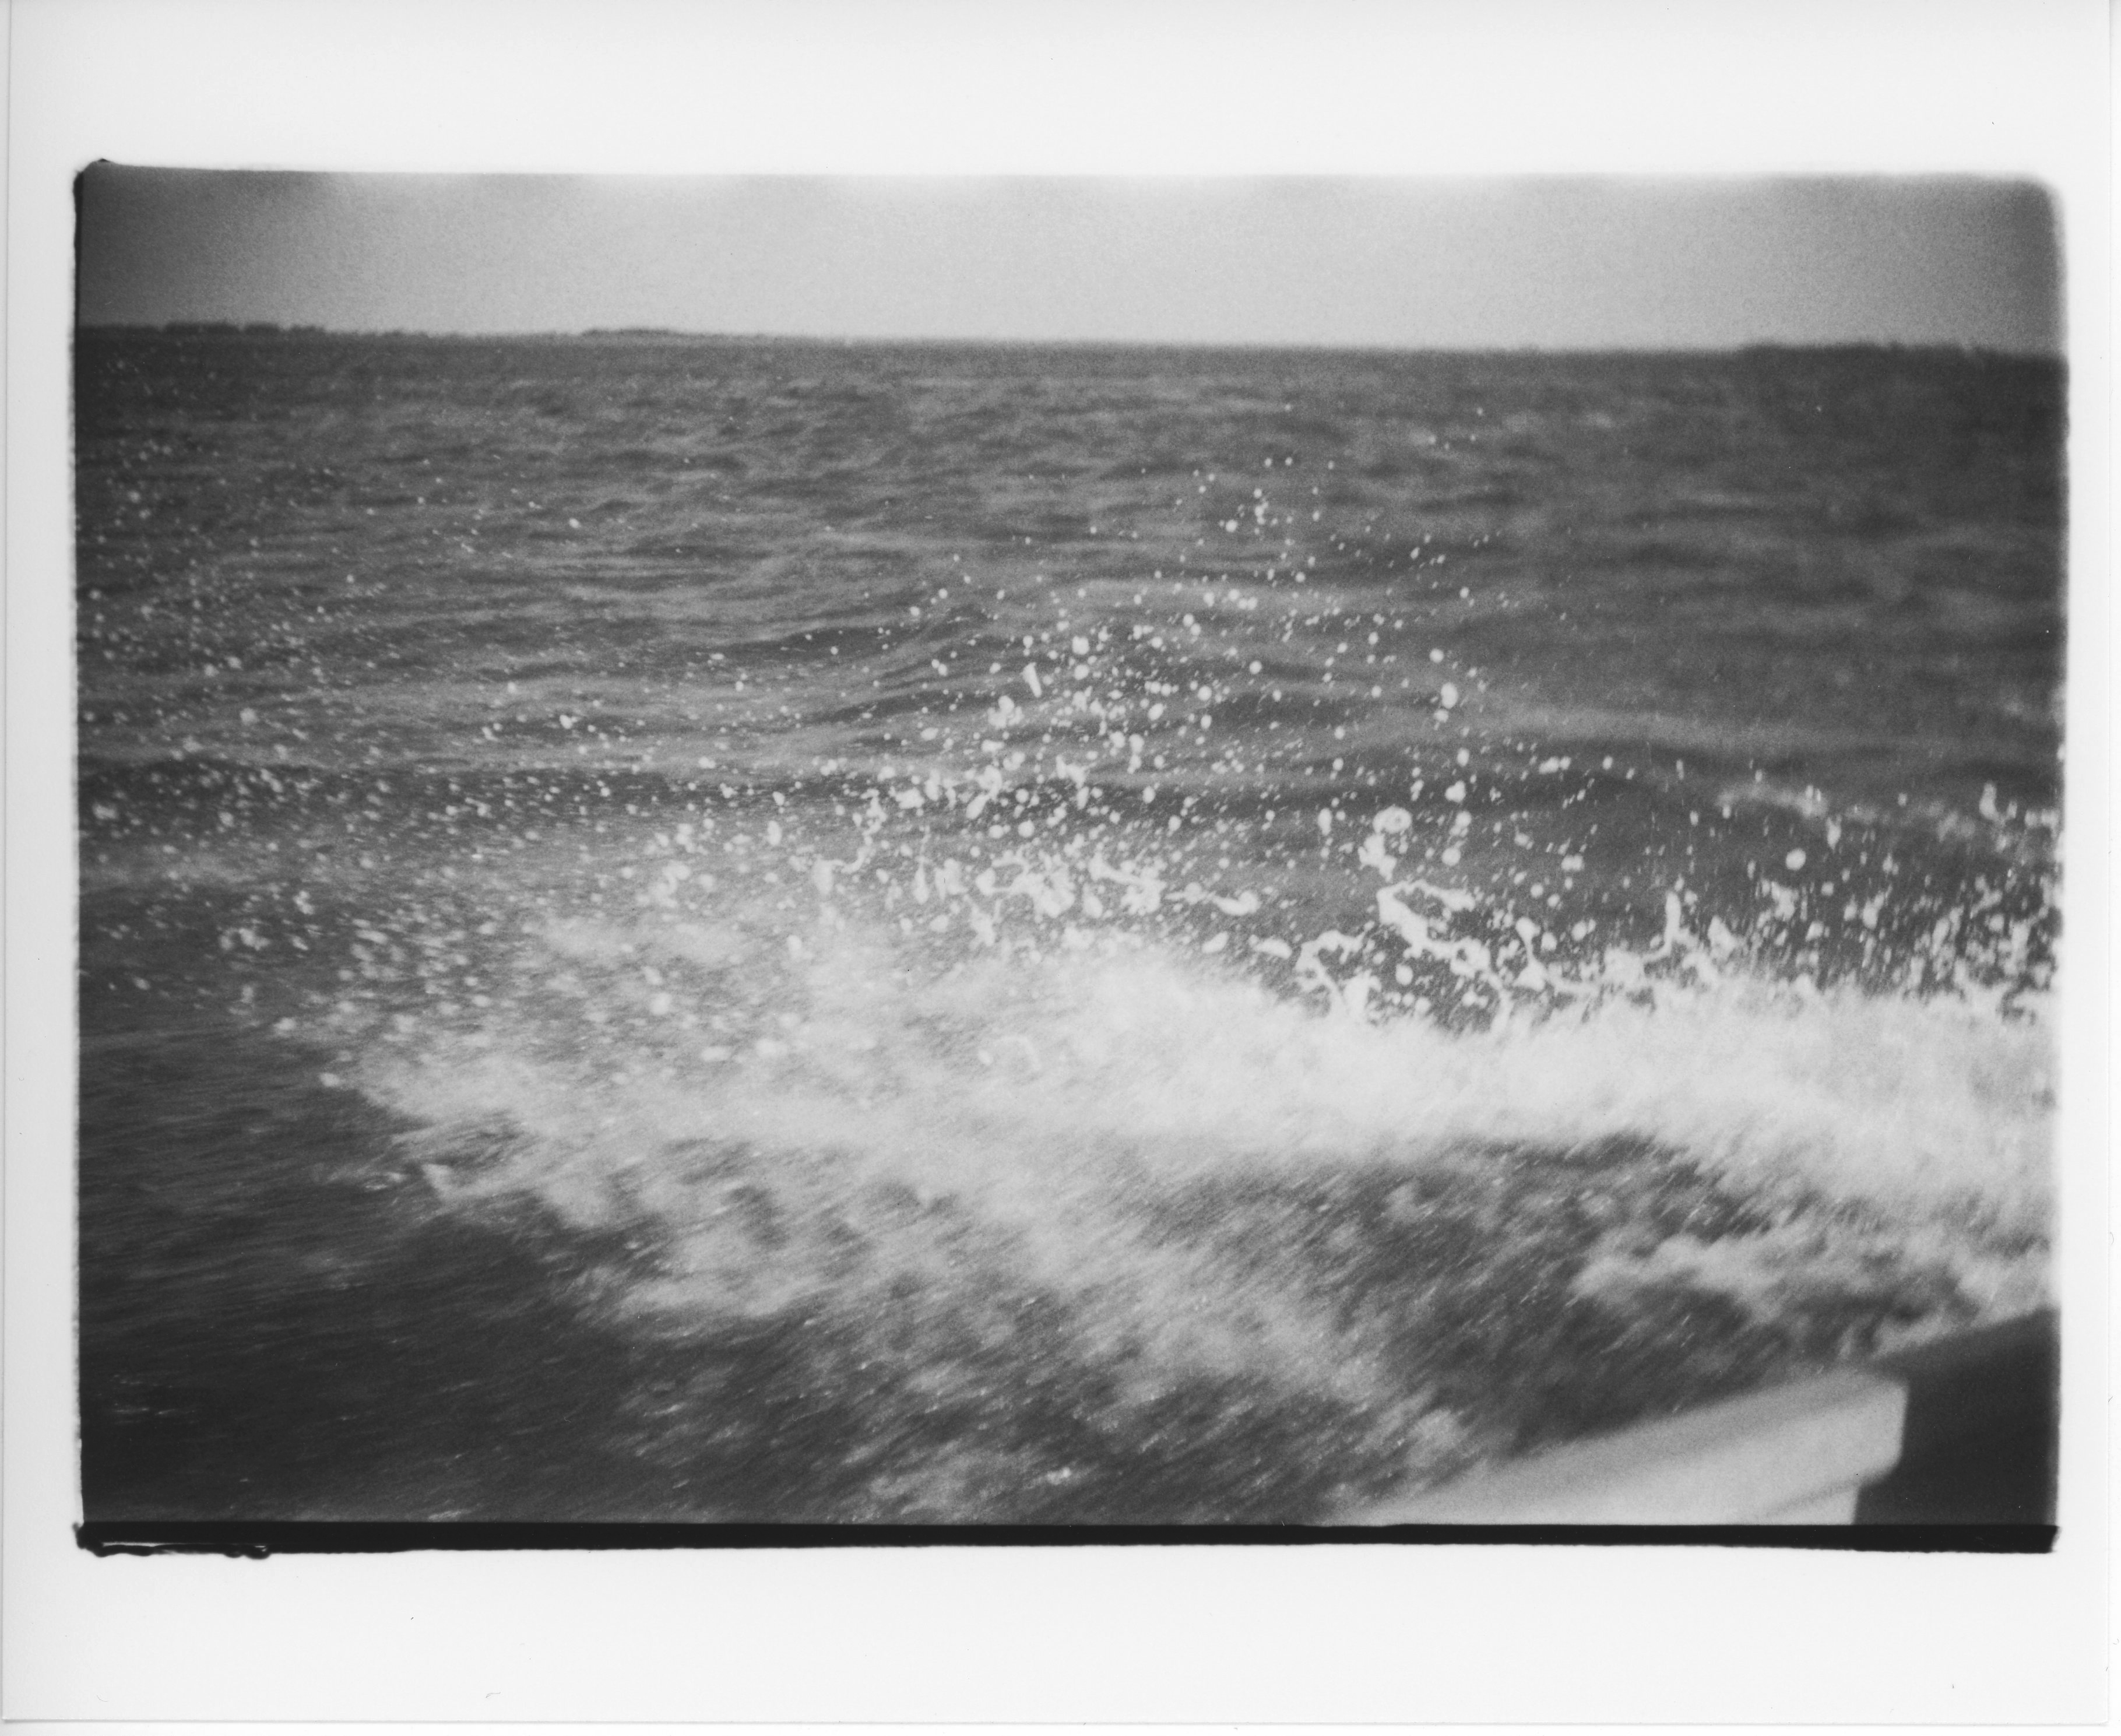 a black and white, 35mm print with messy edges; the photo is shot from inside a small aluminum outboard motor boat; one image shows the oar rest and the side of the boat in the bottom right corner and the rest of the frame is foam and water next to the boat except for a small strip of clear sky at the top of the frame; the foam spray is splashing up out of the water and is sharply focused against the blurry dark waves in the background